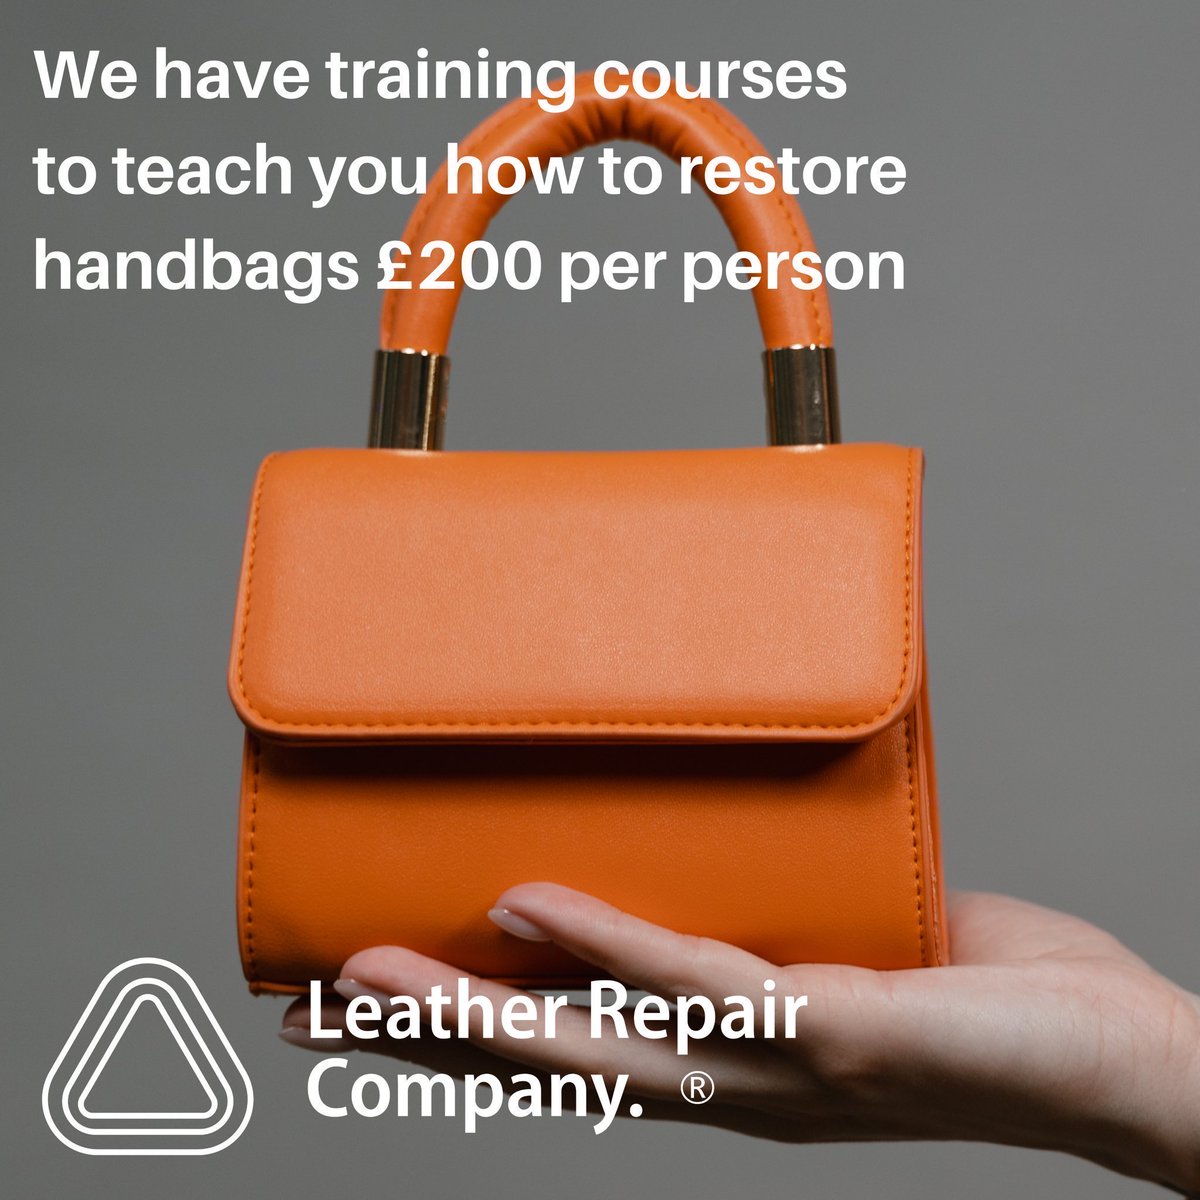 Startup your own #leather #handbag restoration business working from the comfort of your own home, providing a cost effective affordable repair for everyone Just £200 for a hands on training course. Learn new skills today in the fashion industry #EarlyBiz